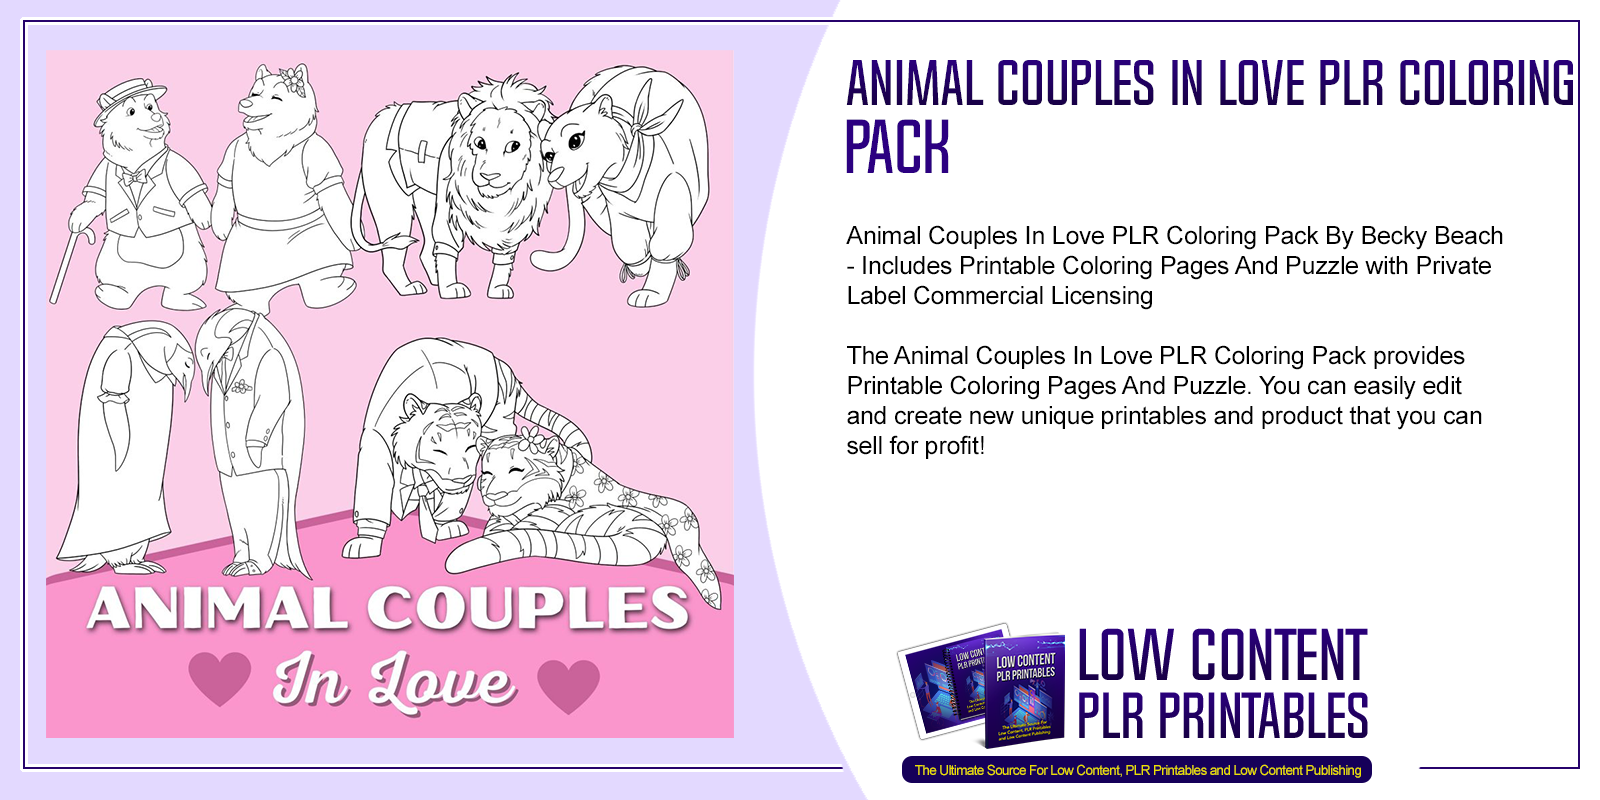 Animal Couples In Love PLR Coloring Pack